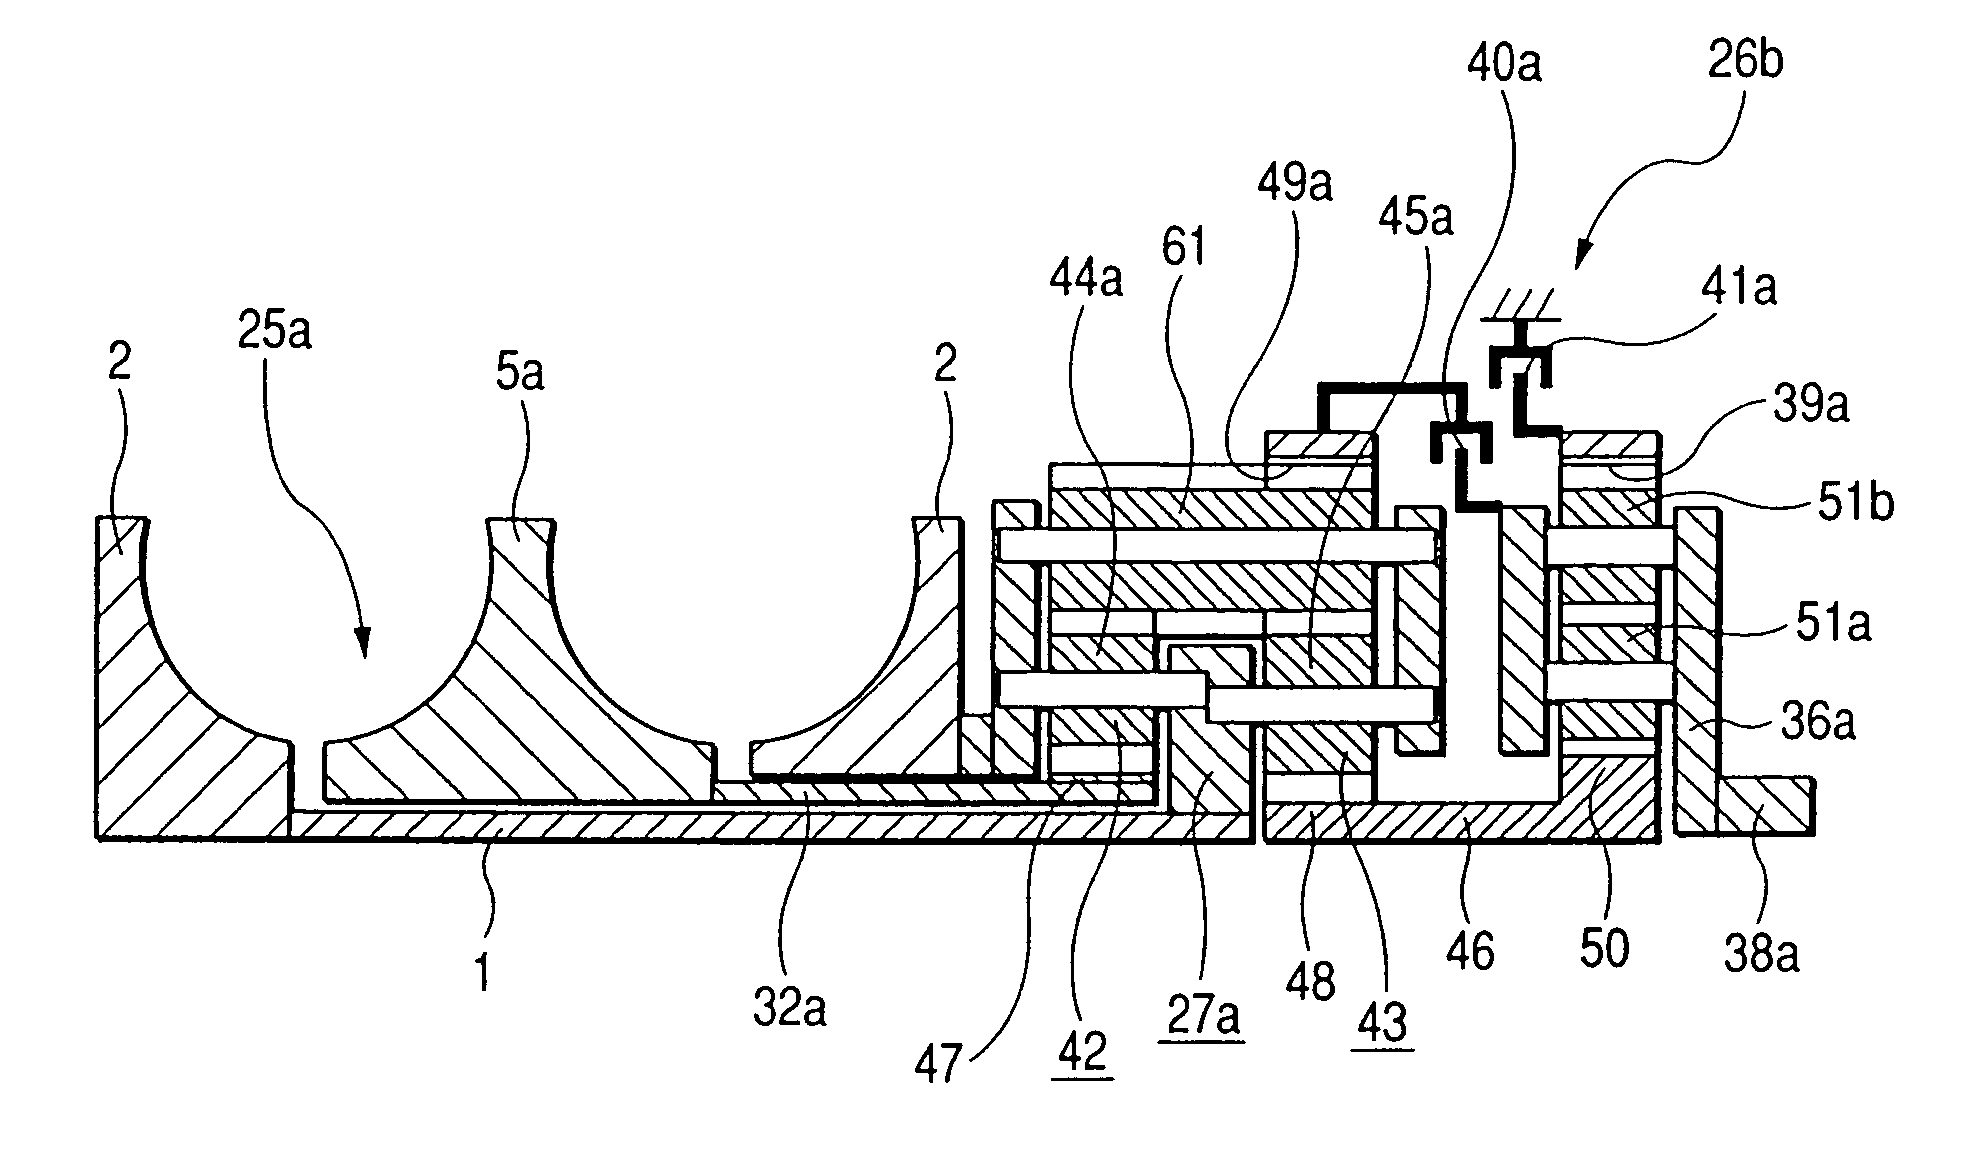 Continuously variable transmission apparatus